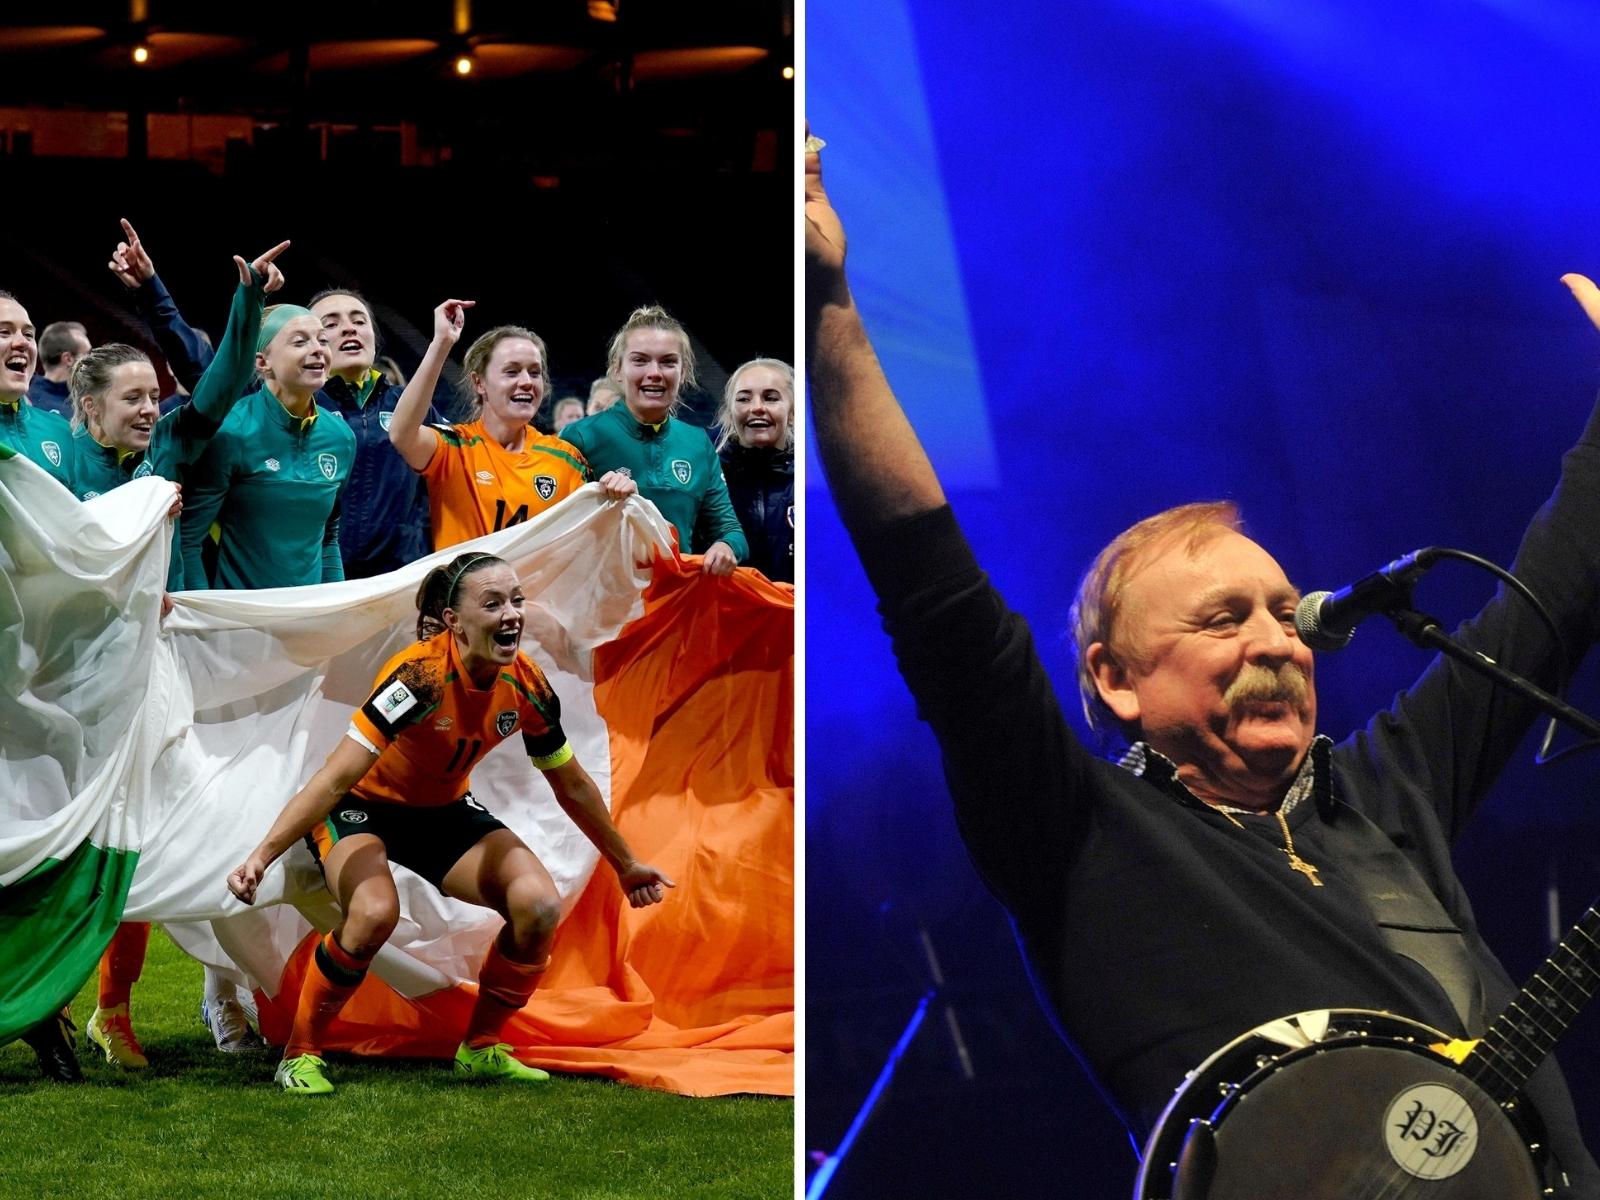 A split-screen of the Irish team and Wolfe Tones singer Brian Warfield.